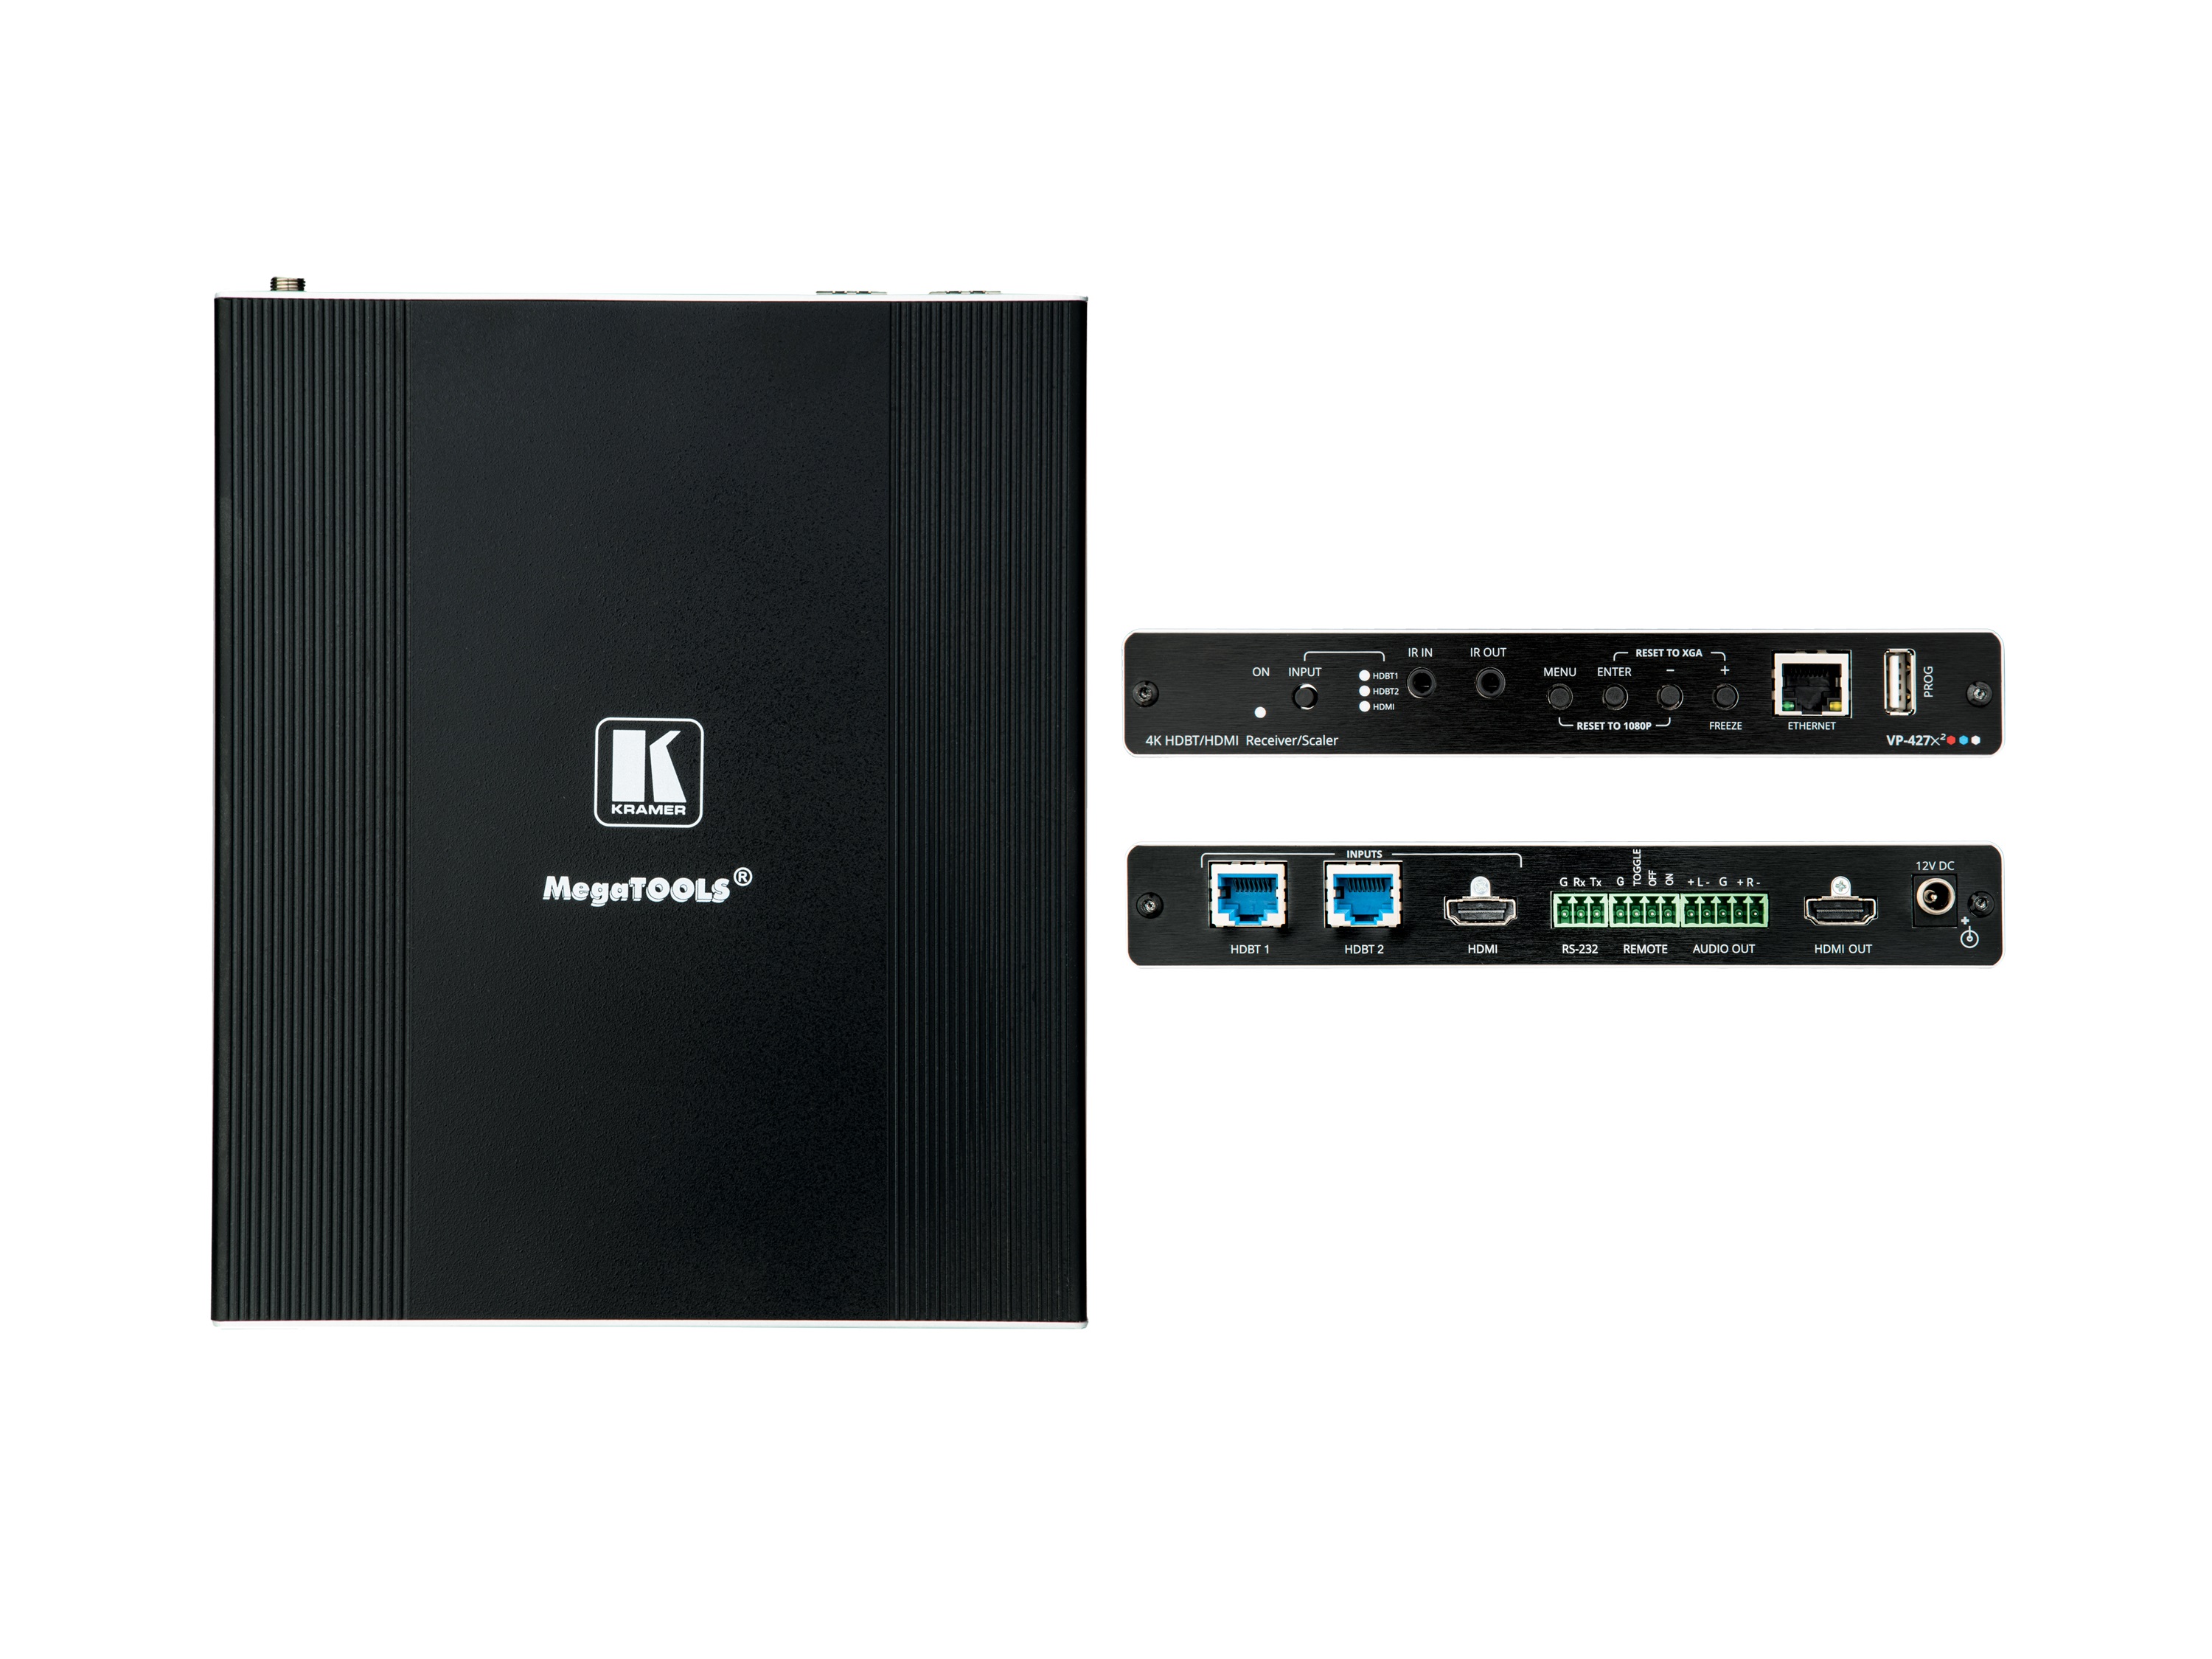 VP-427X2 4K HDR HDBT Receiver/Scaler Tool with HDBaseT and HDMI Inputs by Kramer